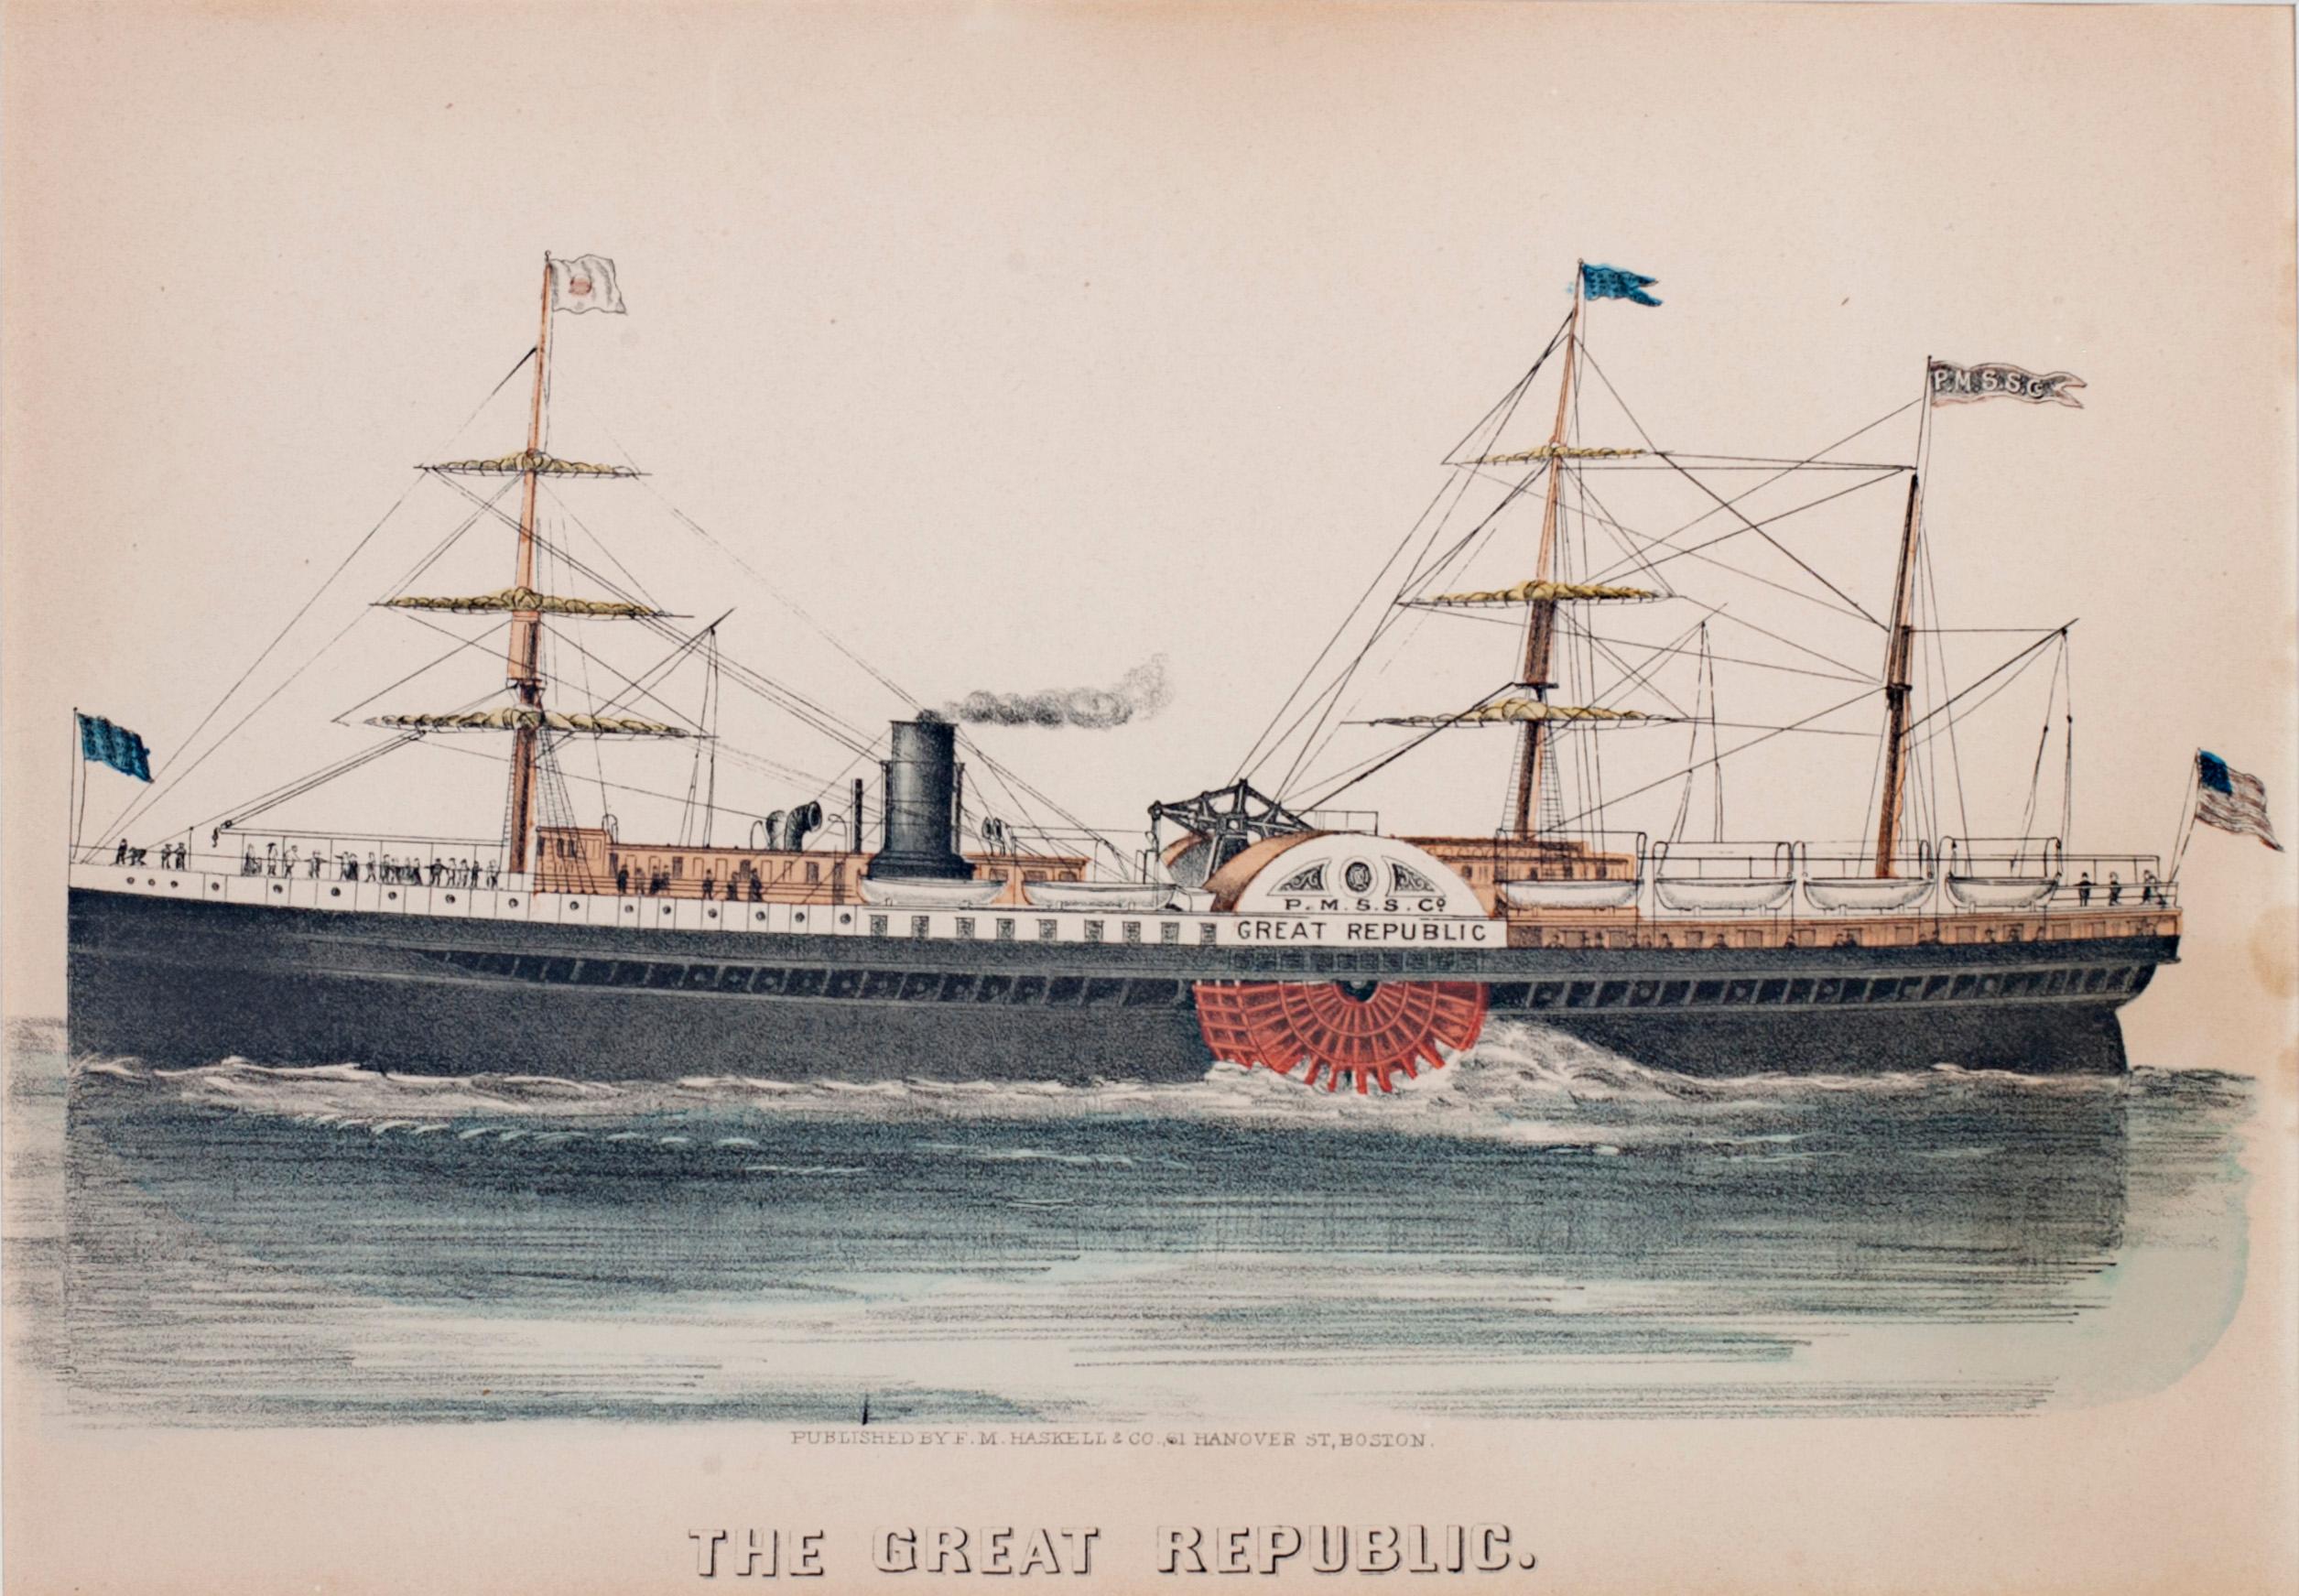 'The Great Republic' original hand-colored lithograph of steamship - Print by F.M. Haskell & Co.